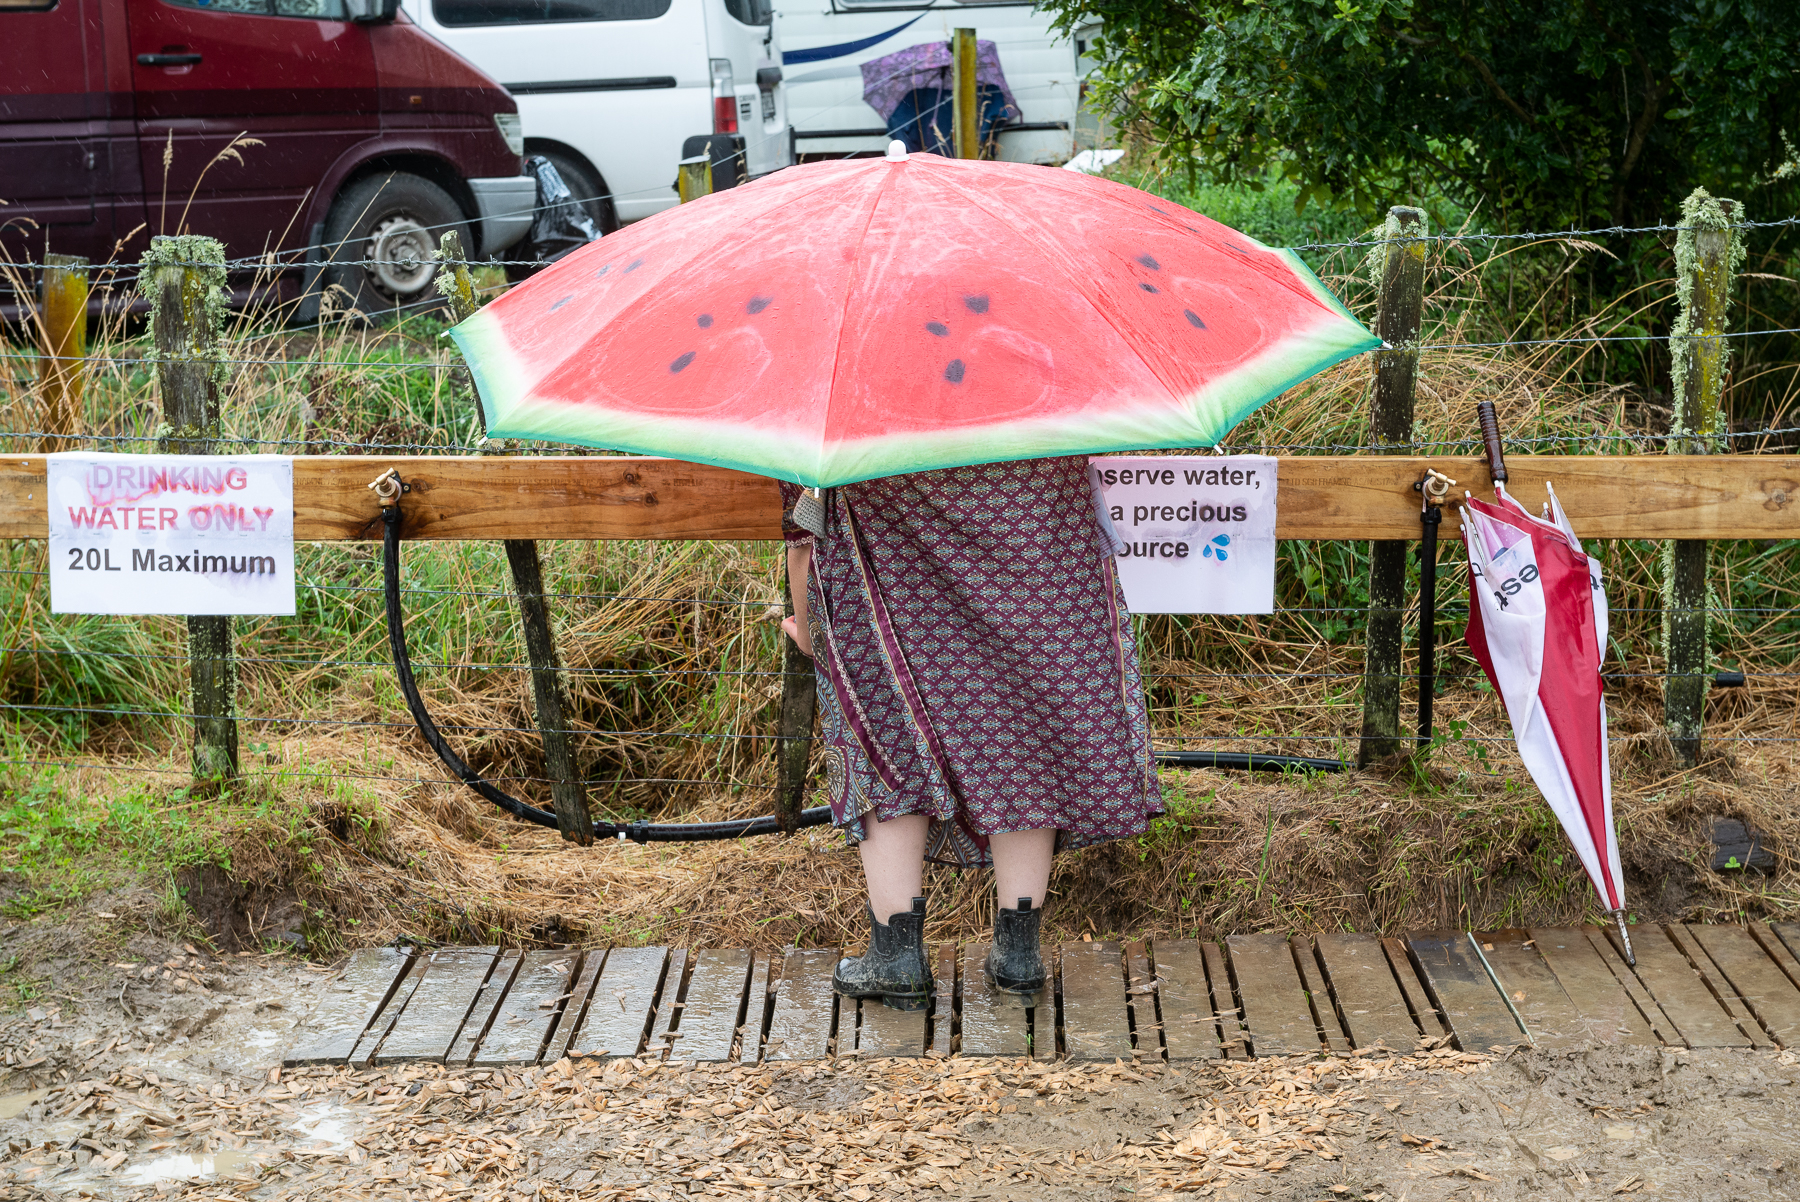 a person stands at the water filling station wearing gumboots and a long dress, holding a bright red watermelon umbrella